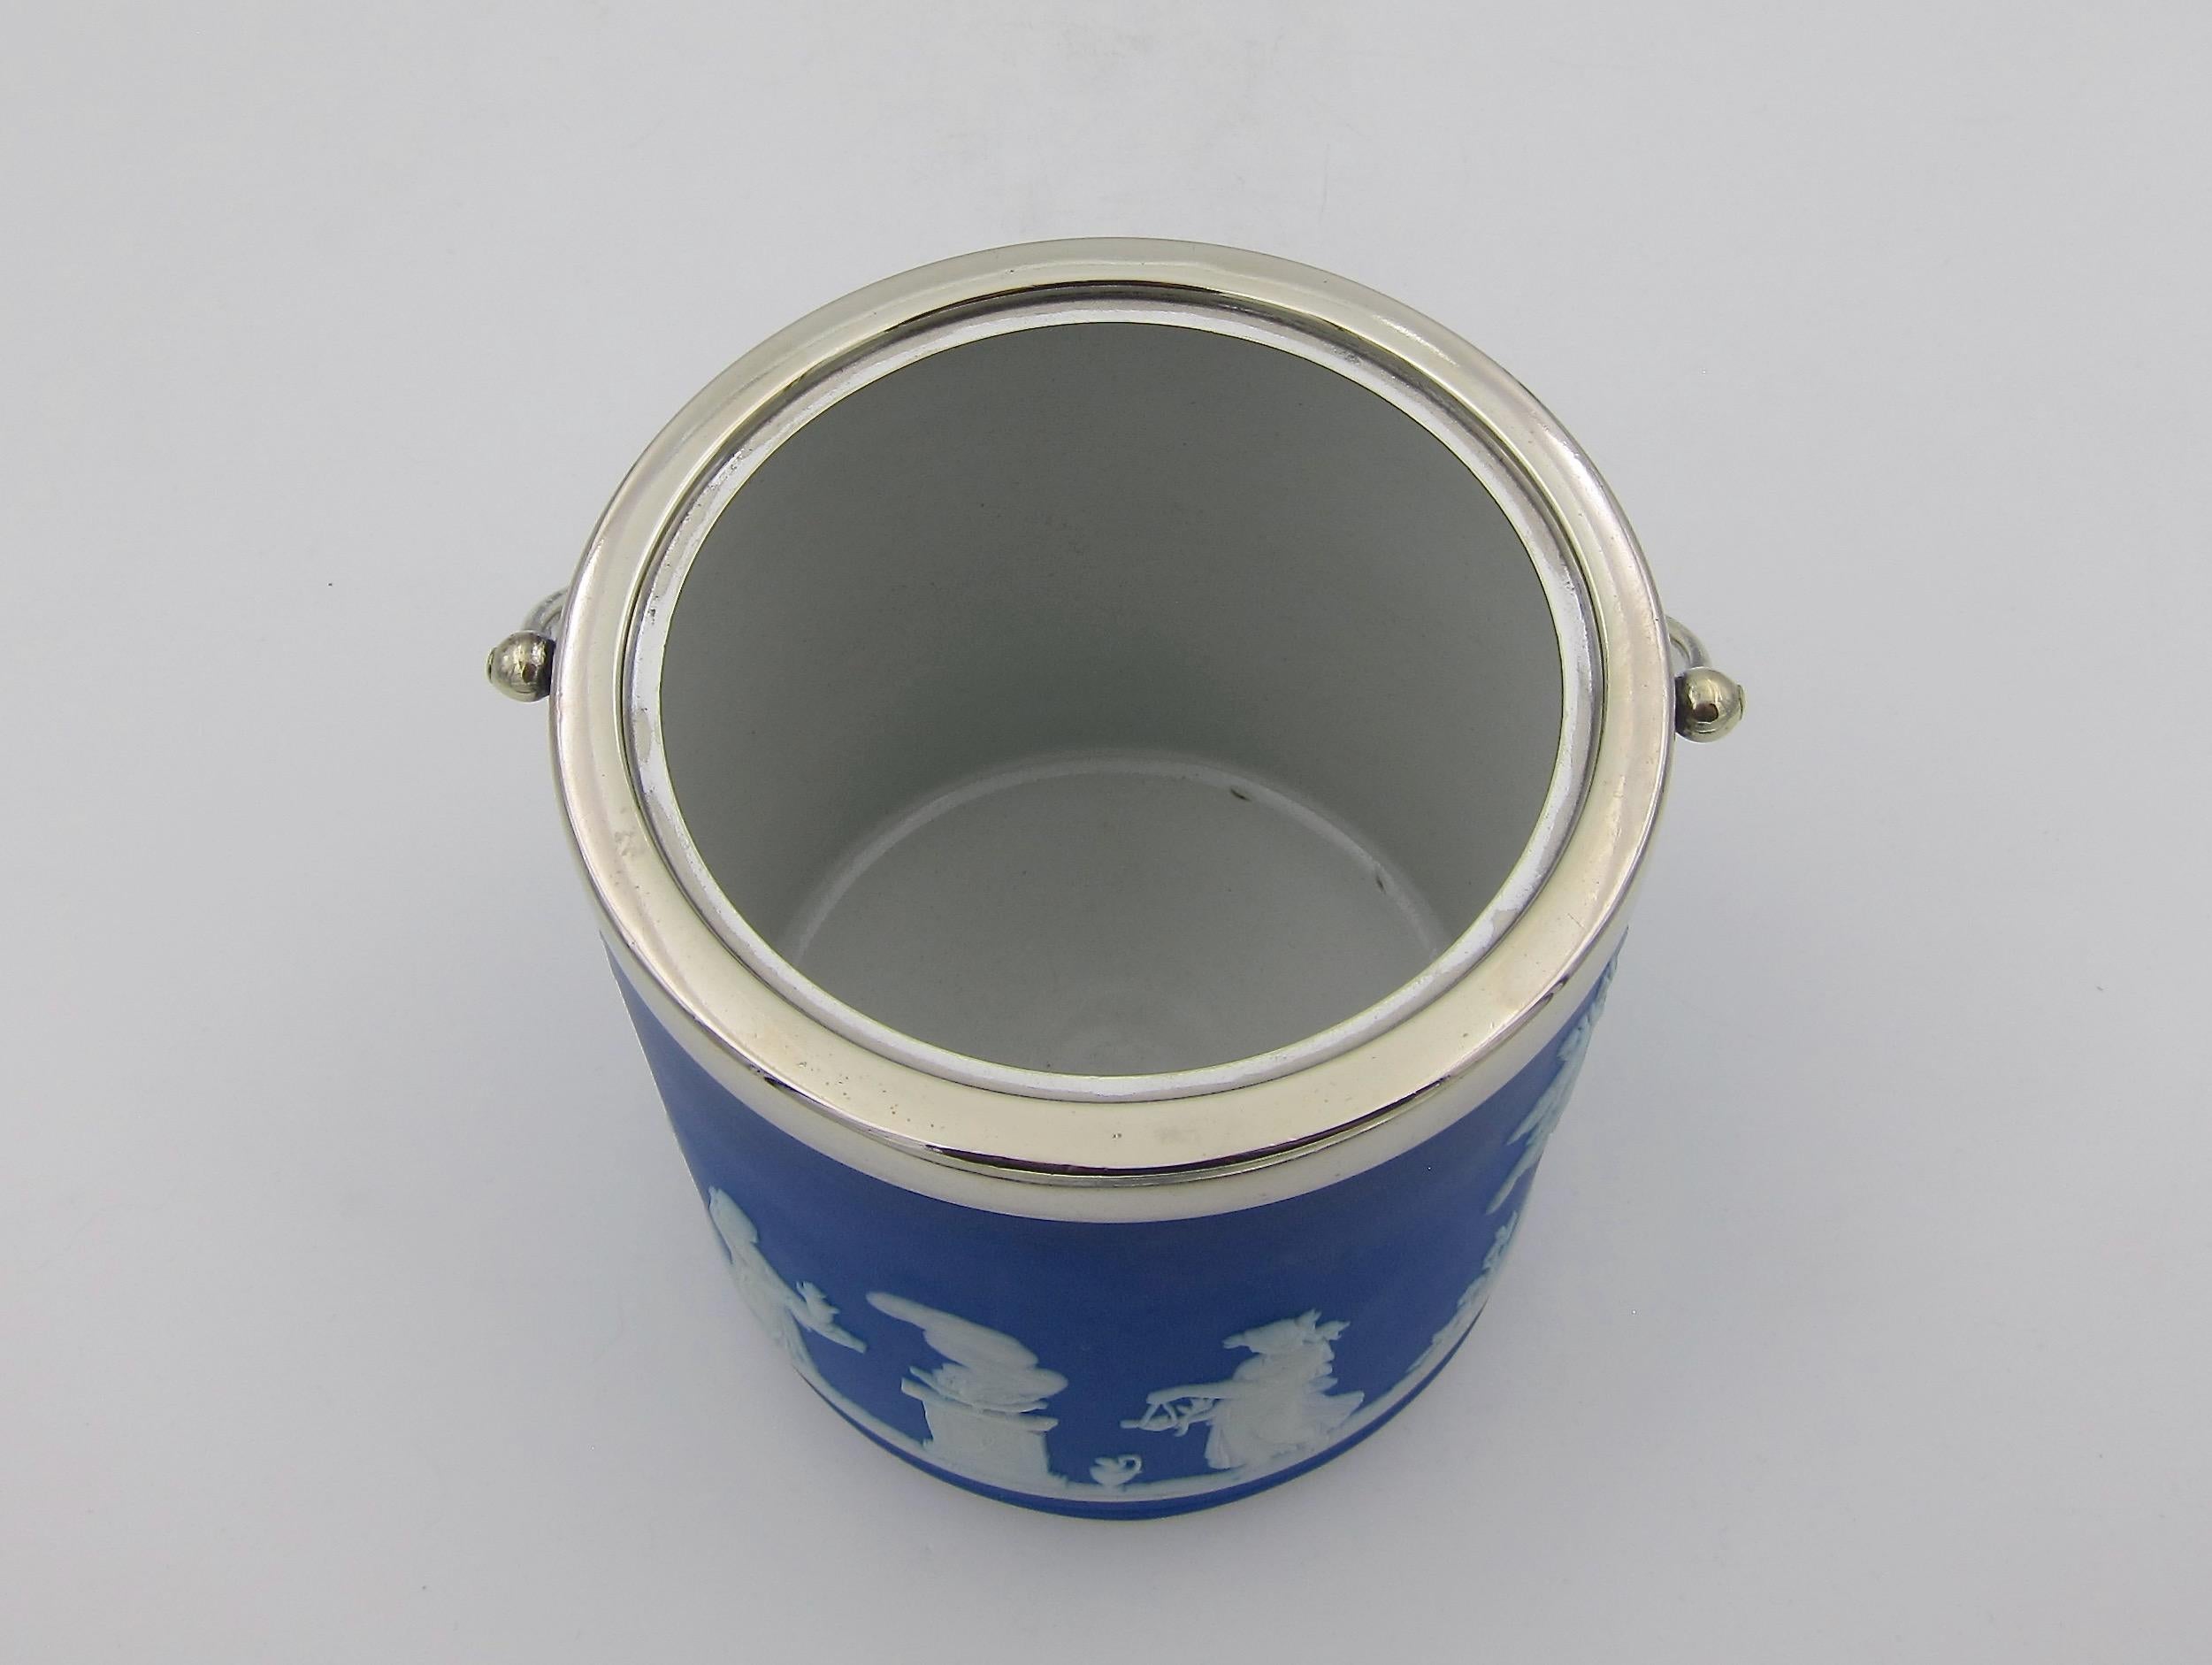 English Antique Wedgwood Biscuit Jar in Blue Jasper with Silver-Plated Fittings